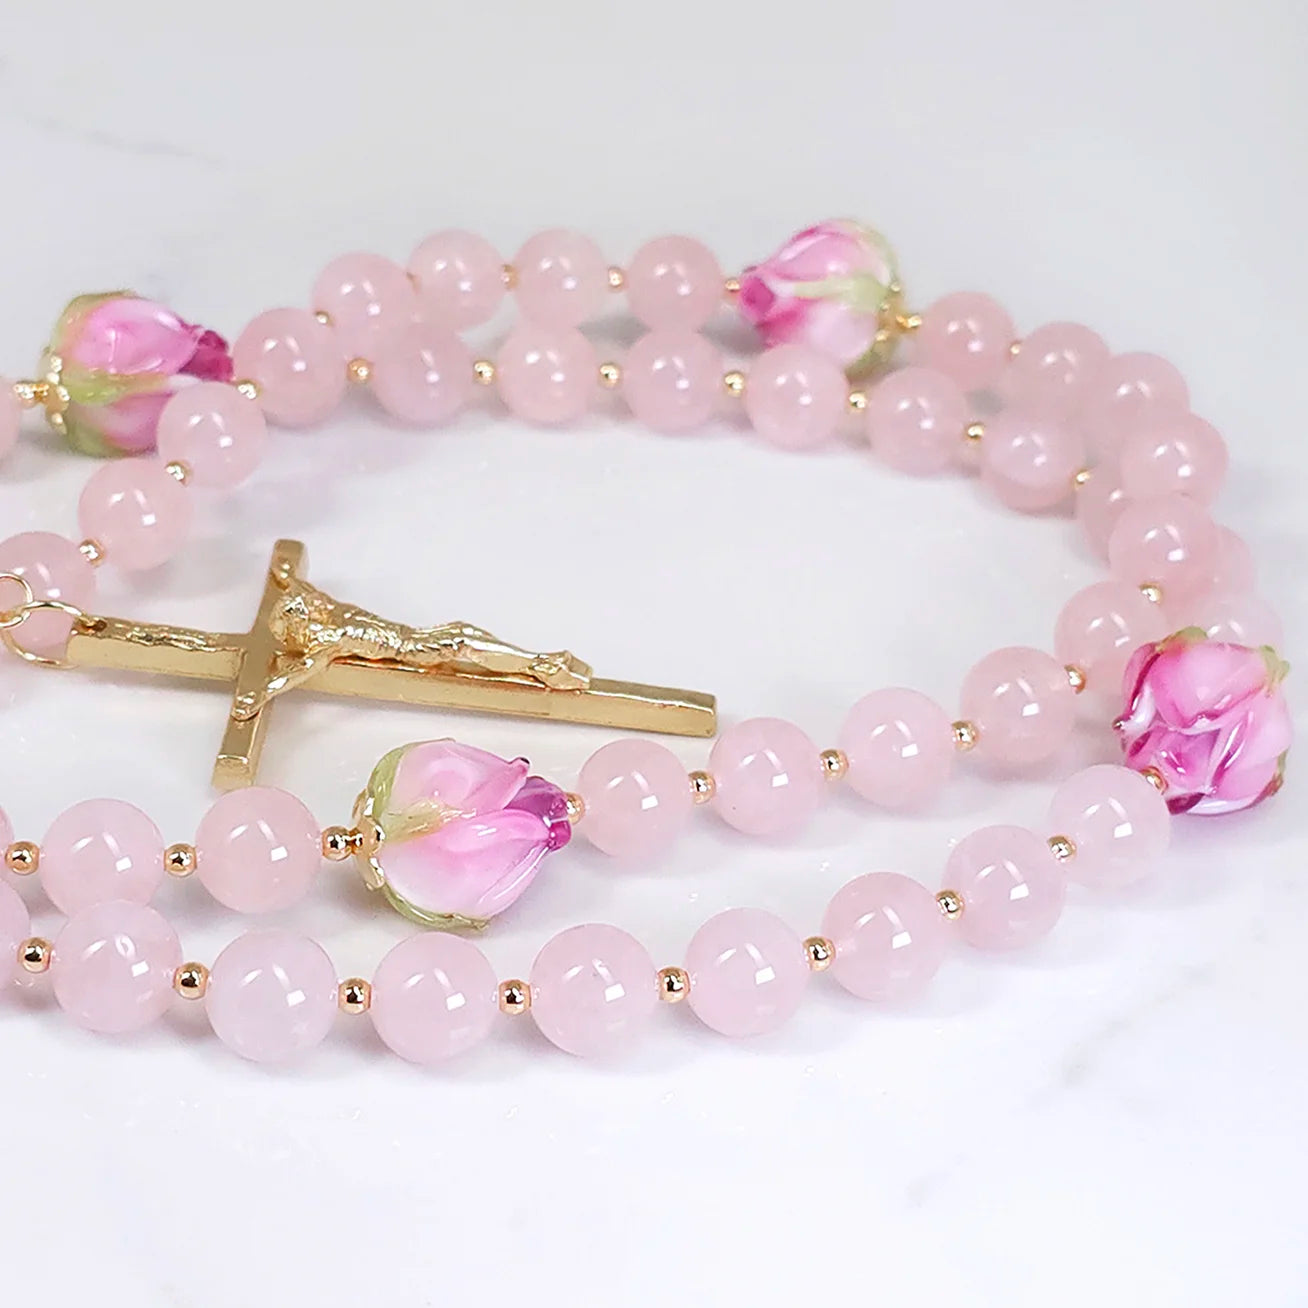 Rosary displaying Pink Rose Quartz and unique rosebud lamp-work flower glass beads, spread out on a white table.